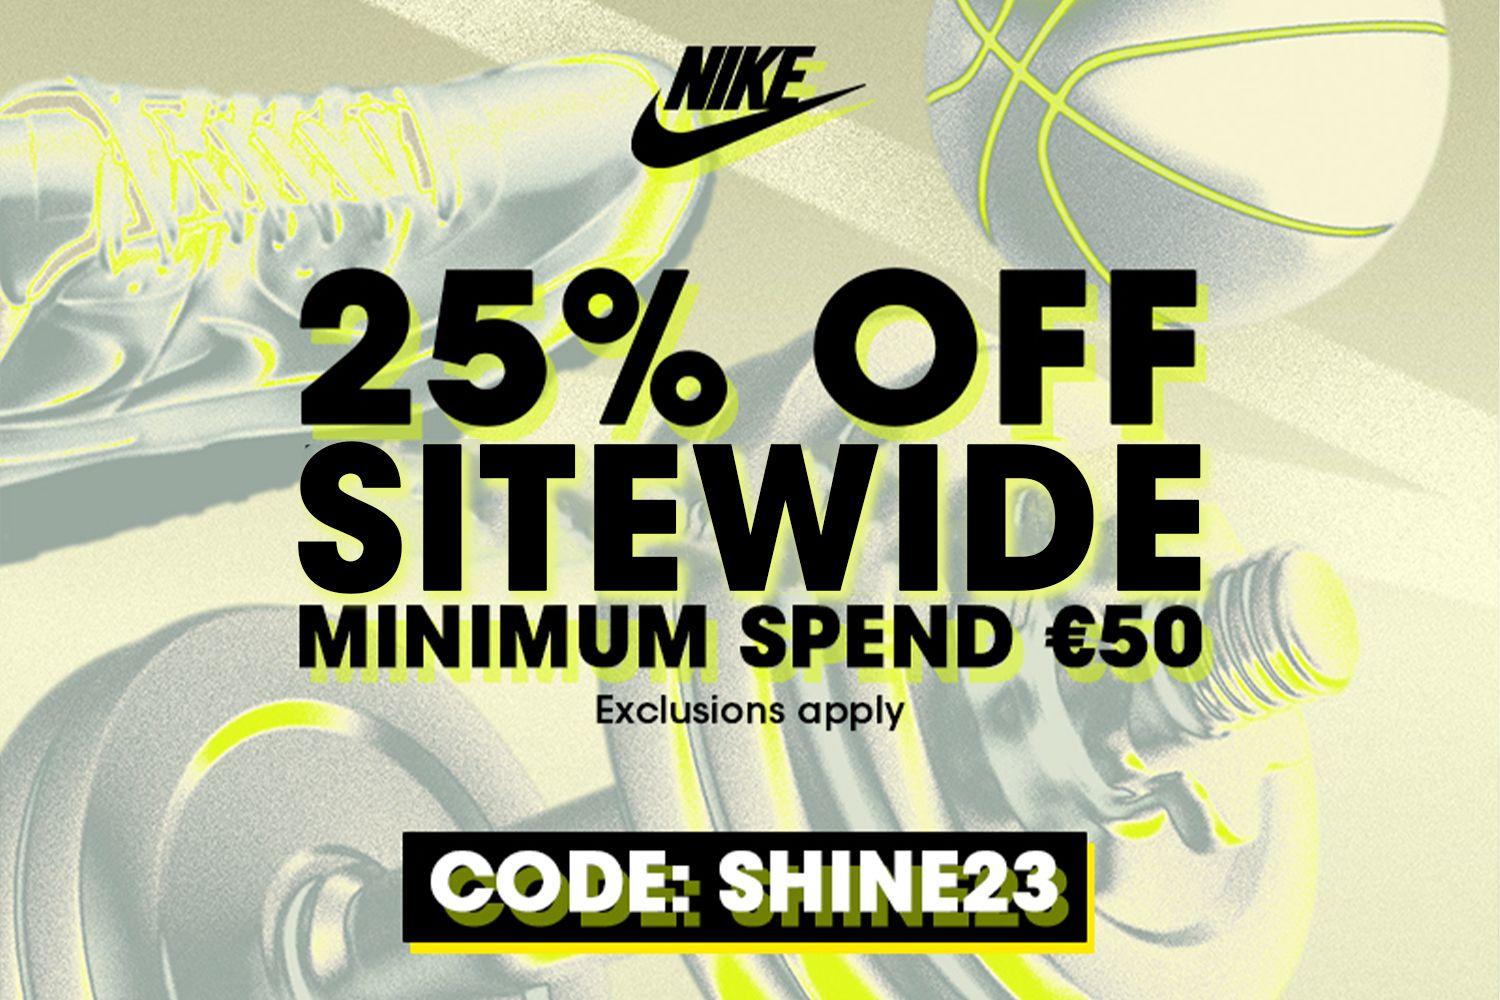 Nike offers a 25% discount sitewide for members